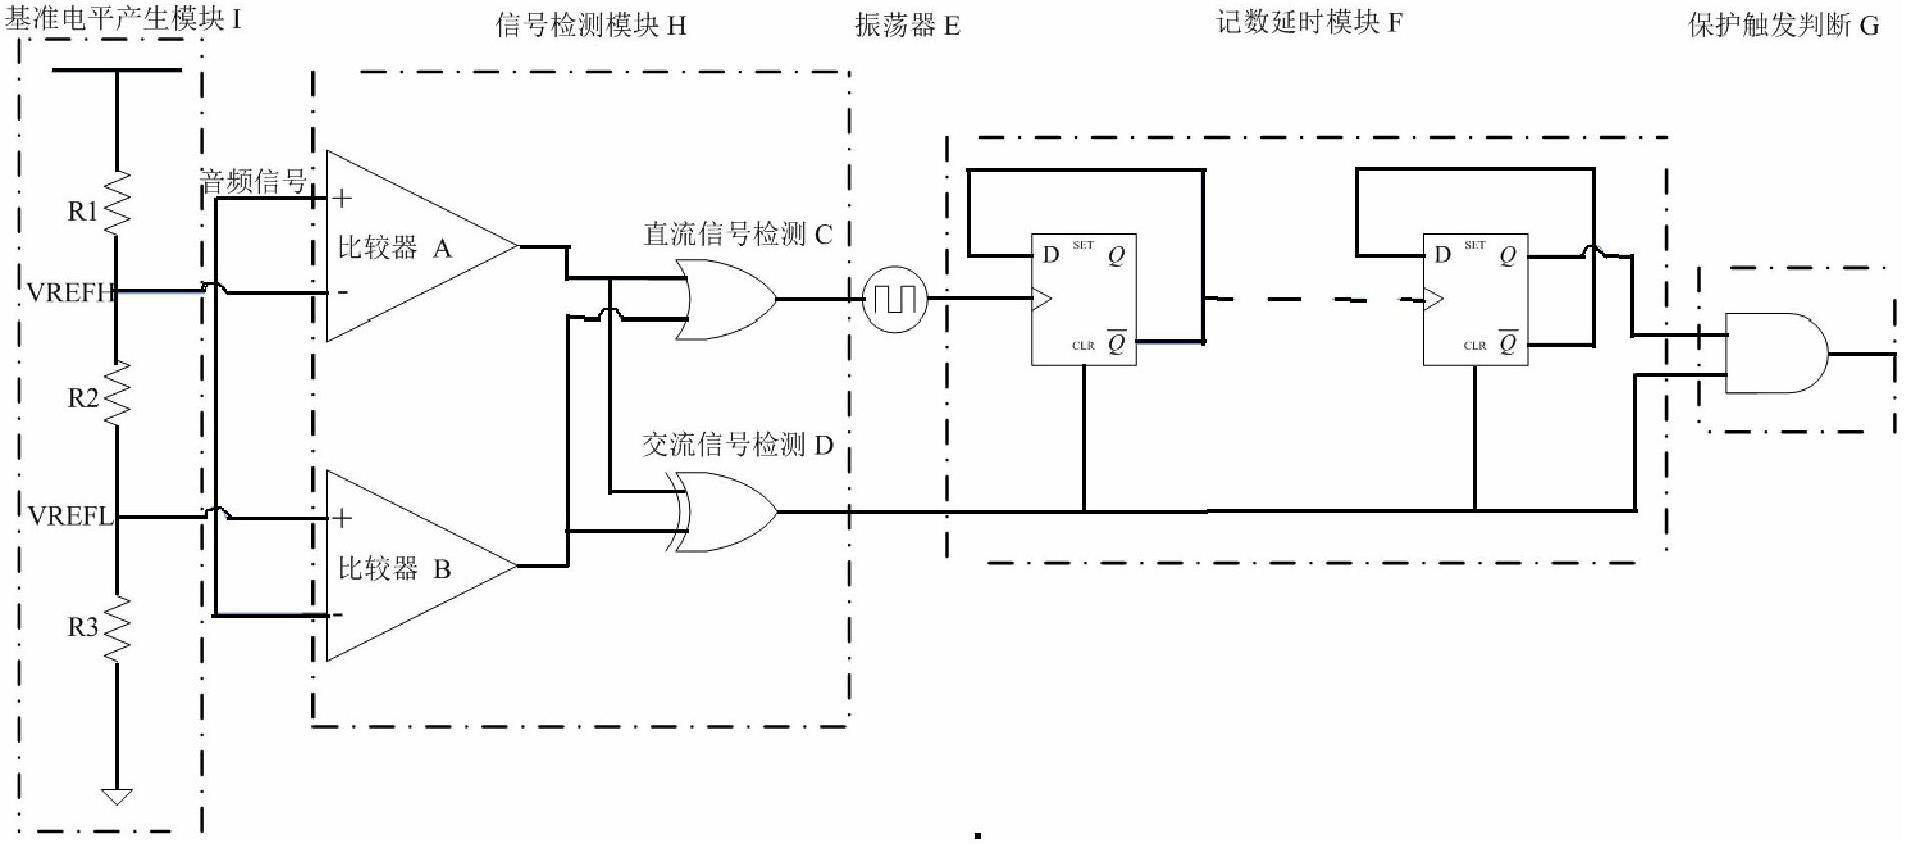 Loudspeaker protection circuit capable of preventing direct current overload for audio power amplifier